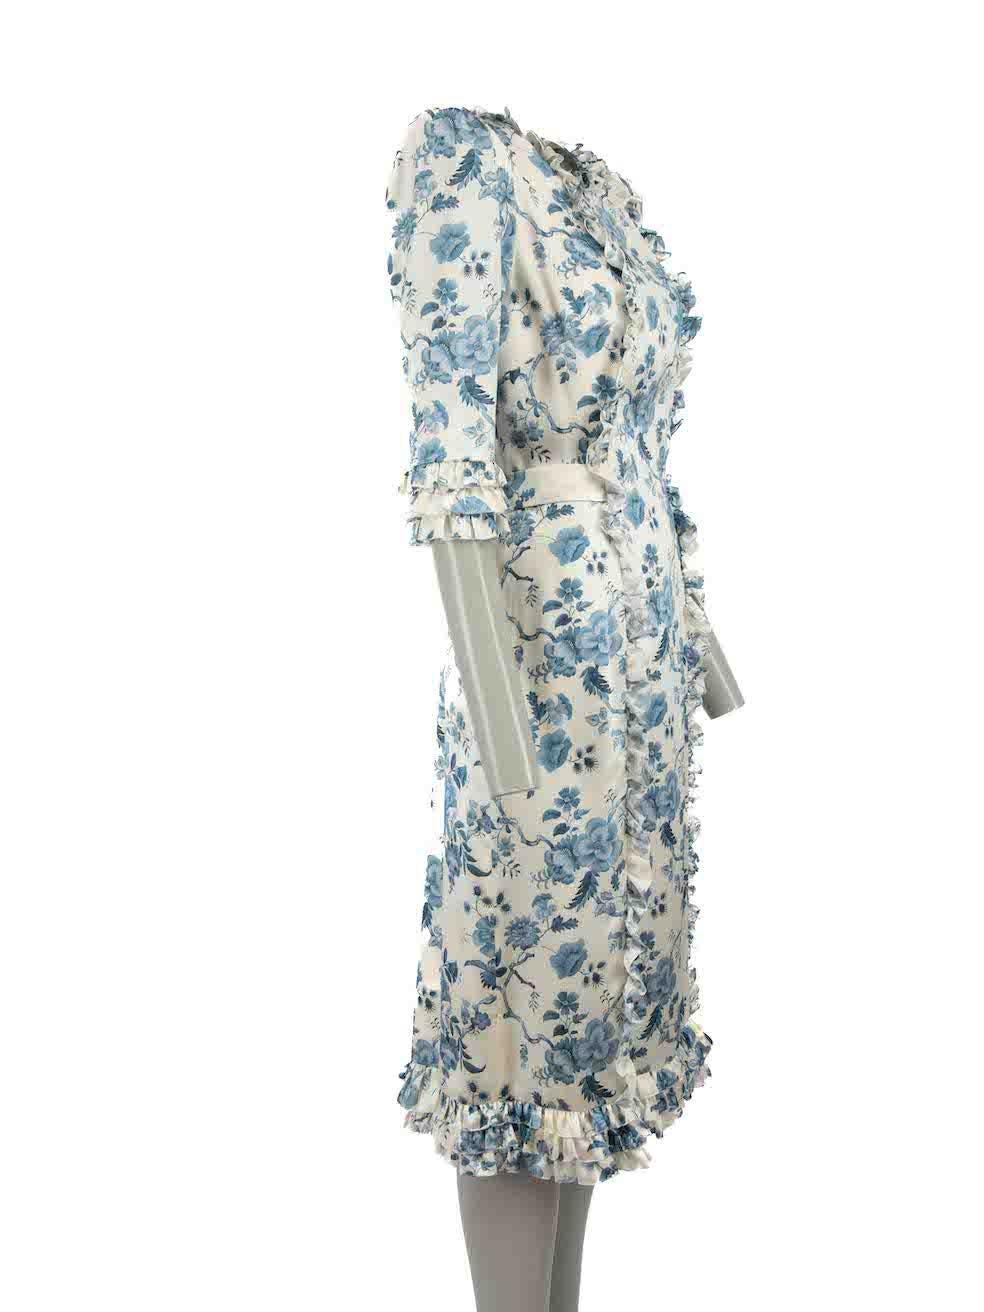 CONDITION is Never worn, with tags. No visible wear to dress is evident on this new The Vampire's Wife designer resale item, however the ends of both waist ties have marks to the silk due to poor storage.
 
Details
White
Silk
Dress
Blue floral